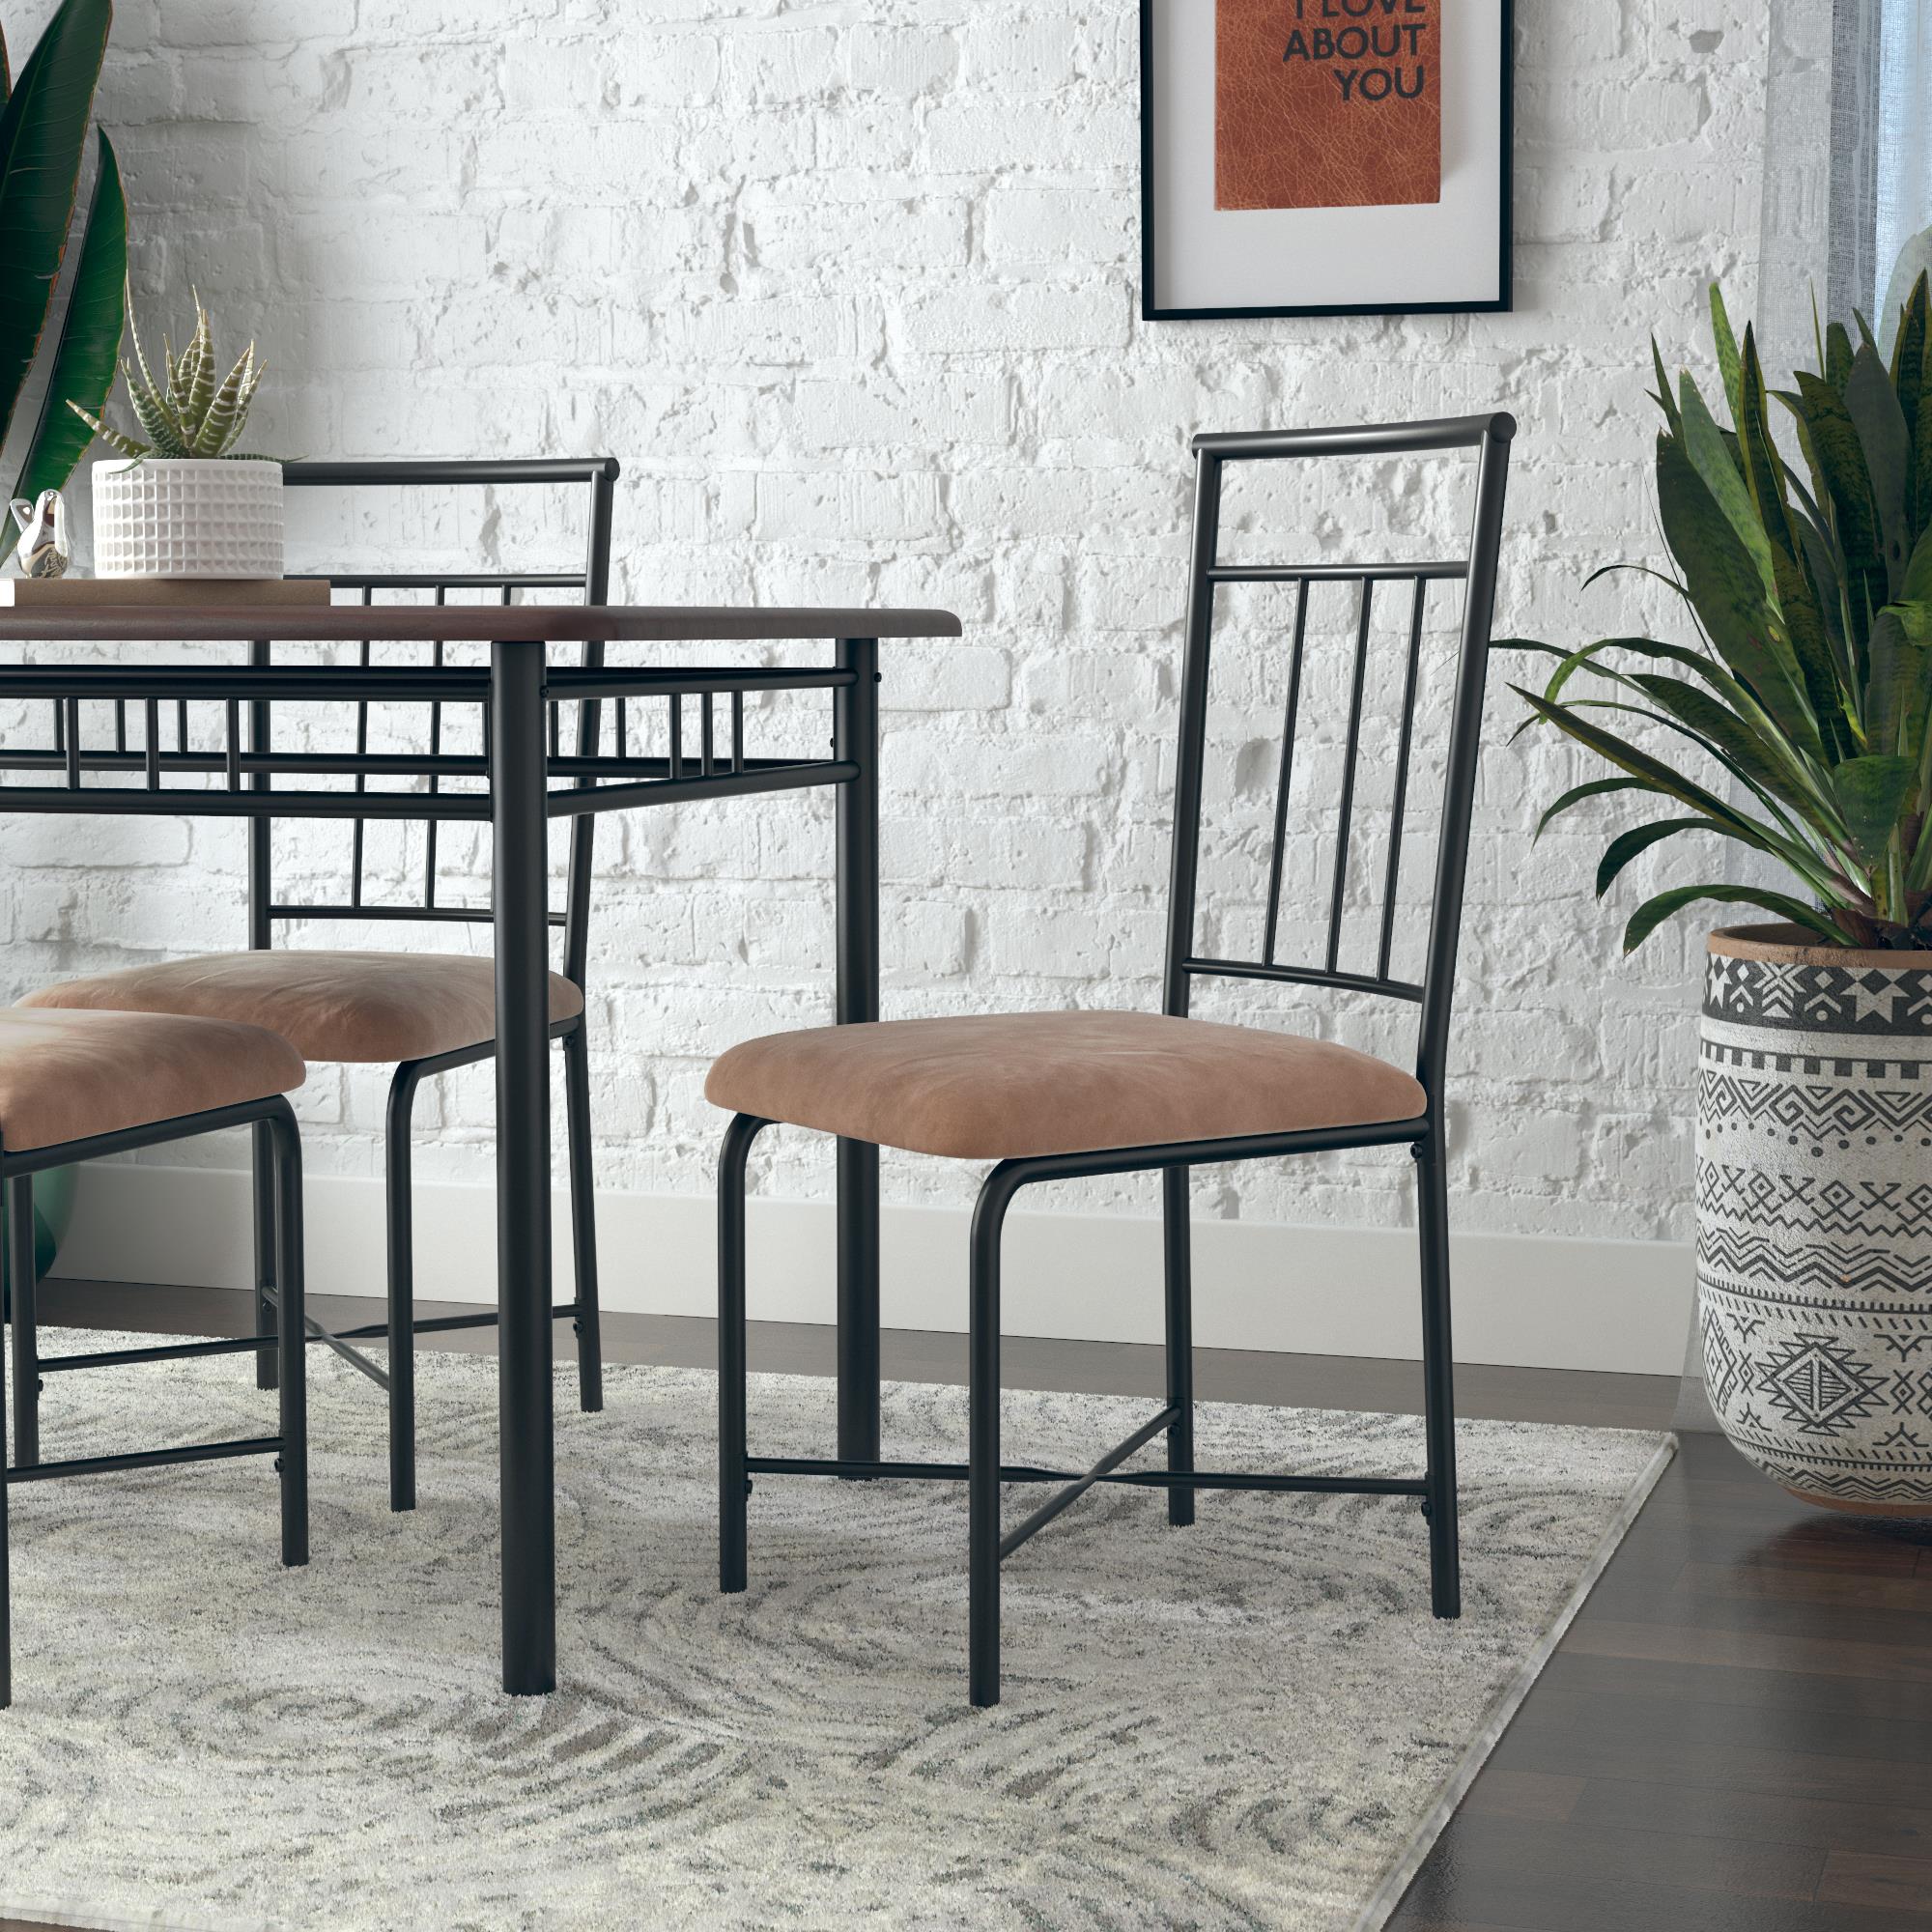 Mainstays Louise Traditional 5-Piece Wood & Metal Dining Set, Deep Walnut - image 3 of 22